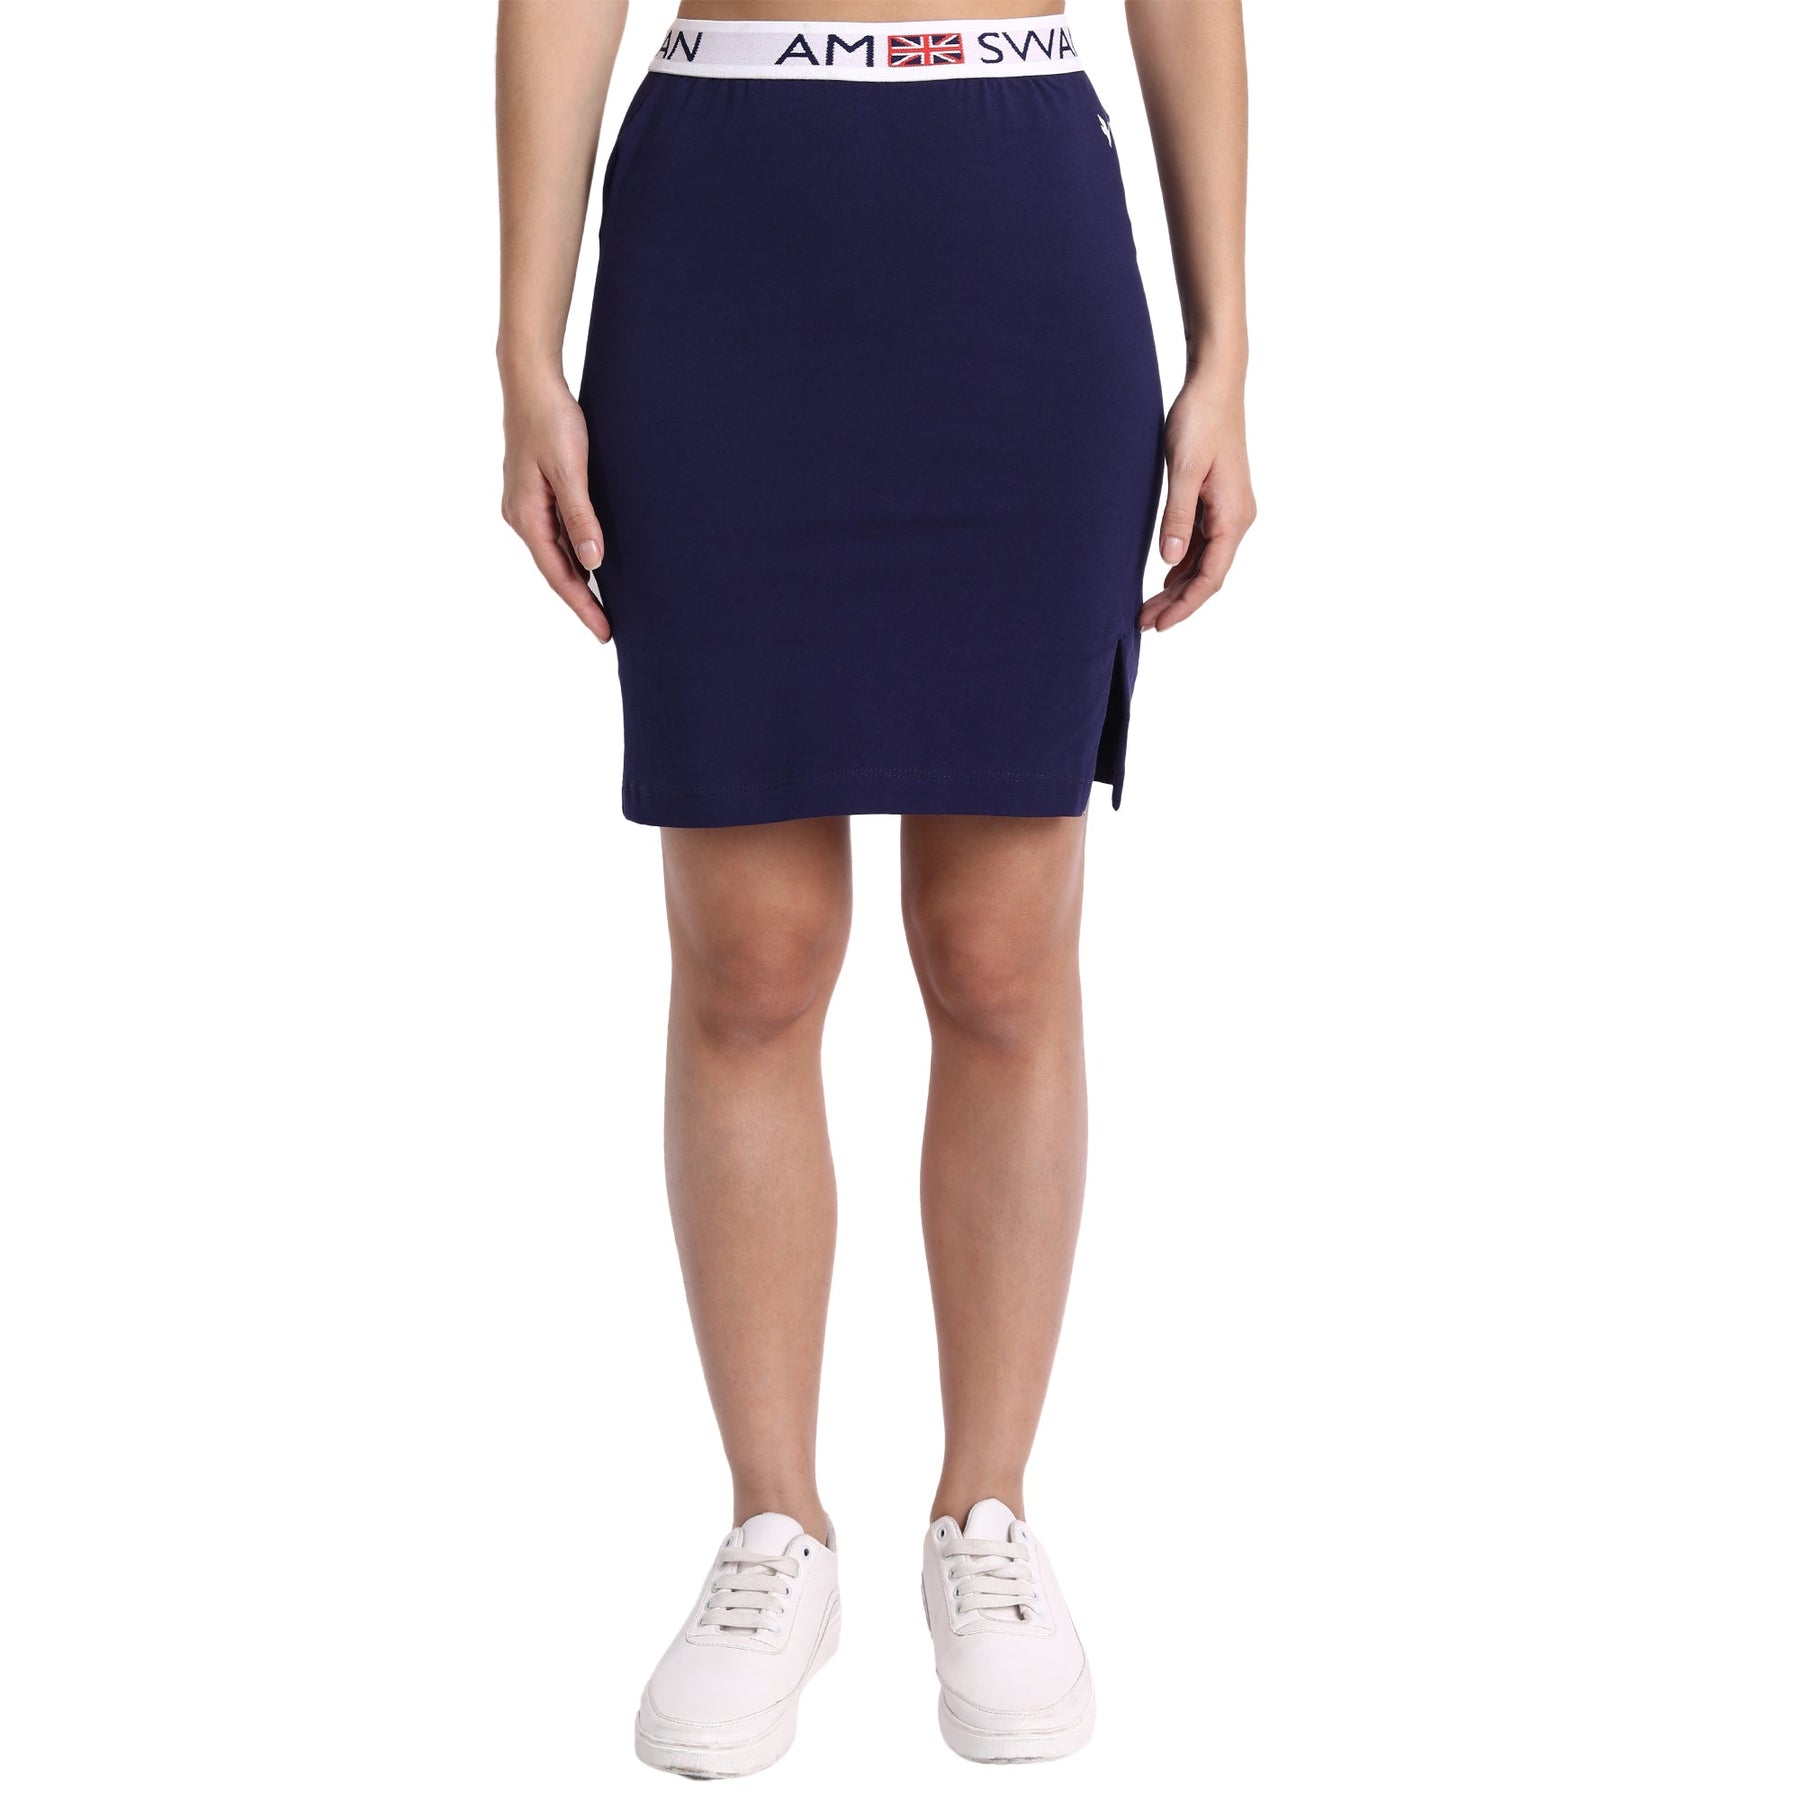 Smart Fit Pencil Skirts for Women in Premium Solid Cotton